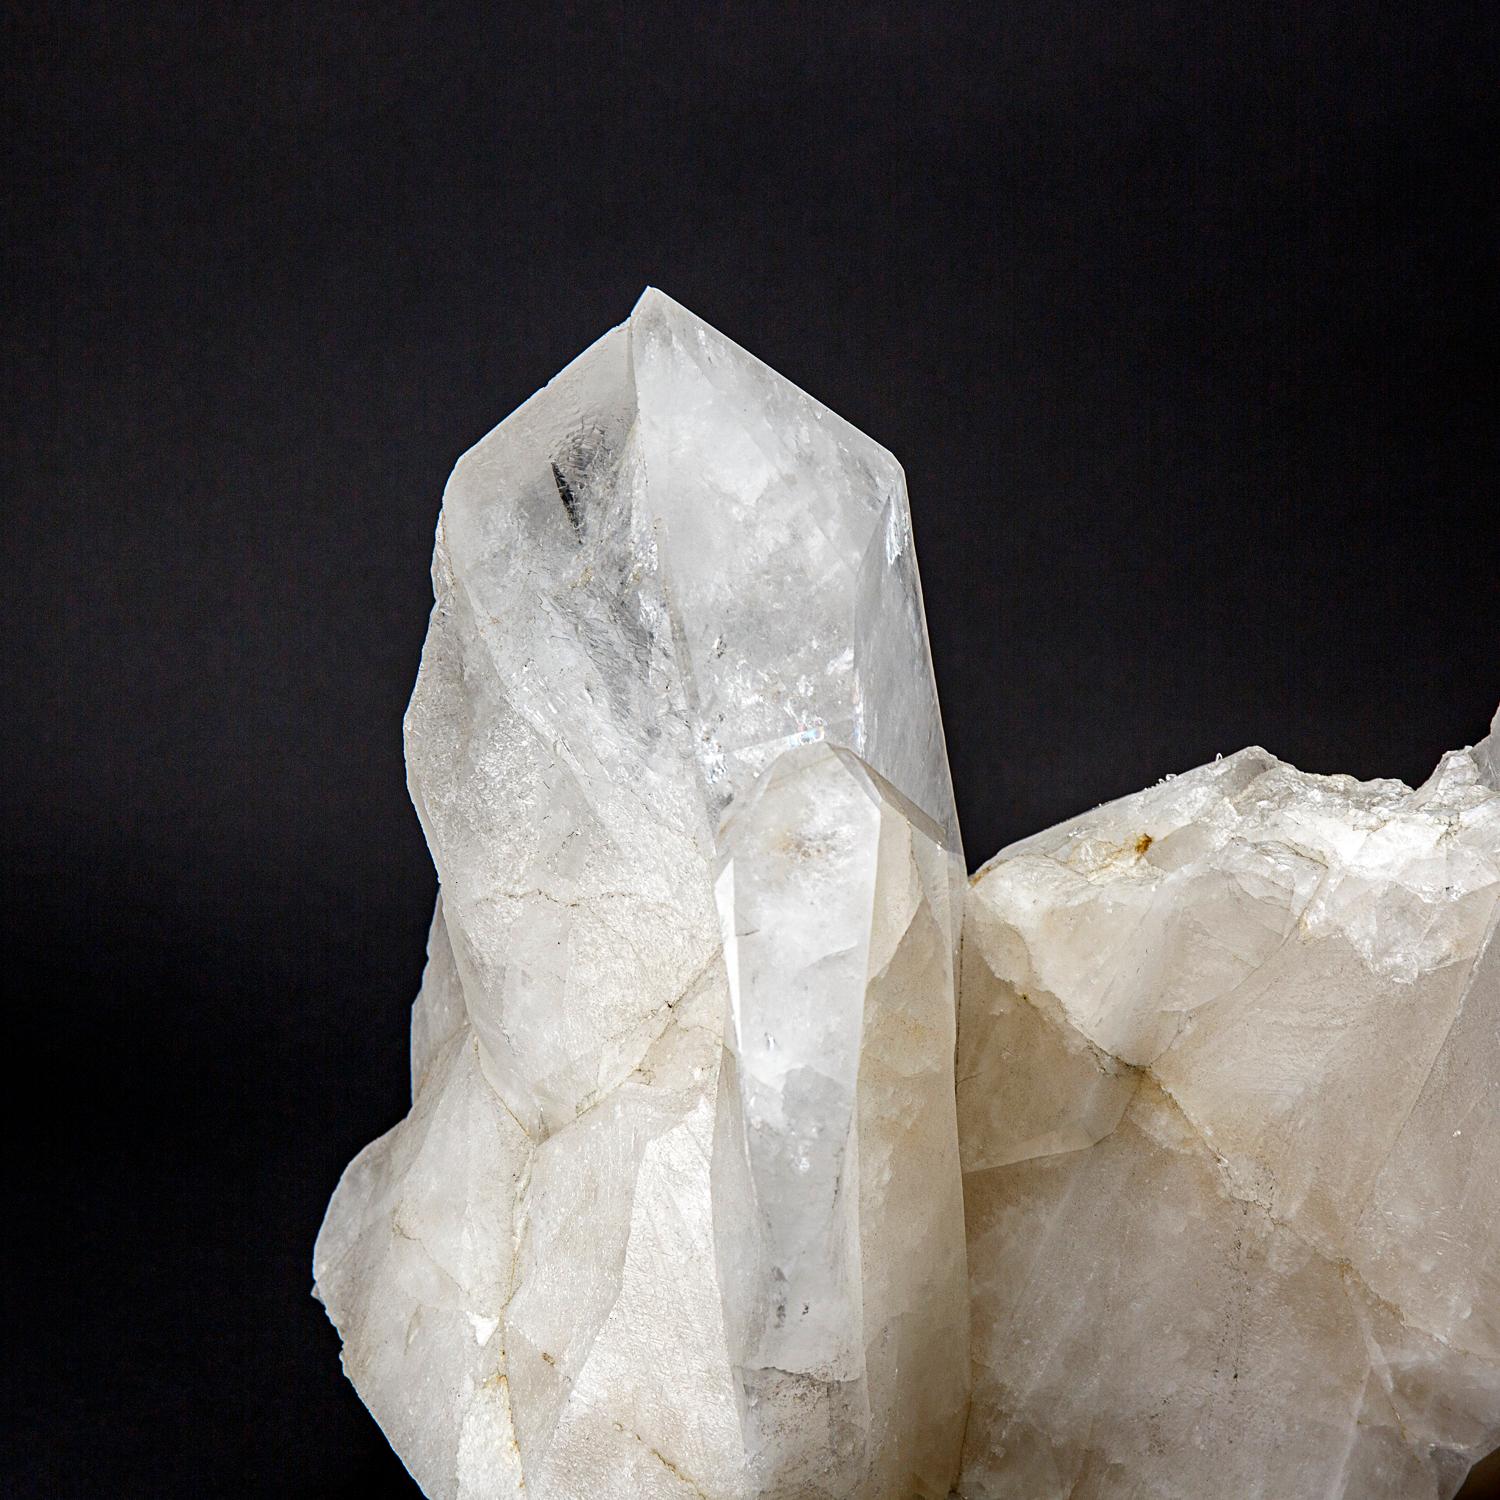 This Genuine Clear Quartz Crystal Cluster Point from Brazil weighs 84 lbs and is crafted from premium clear quartz crystals. With a complete termination and a shiny, reflective surfaces and this crystal serves as an excellent present or a striking